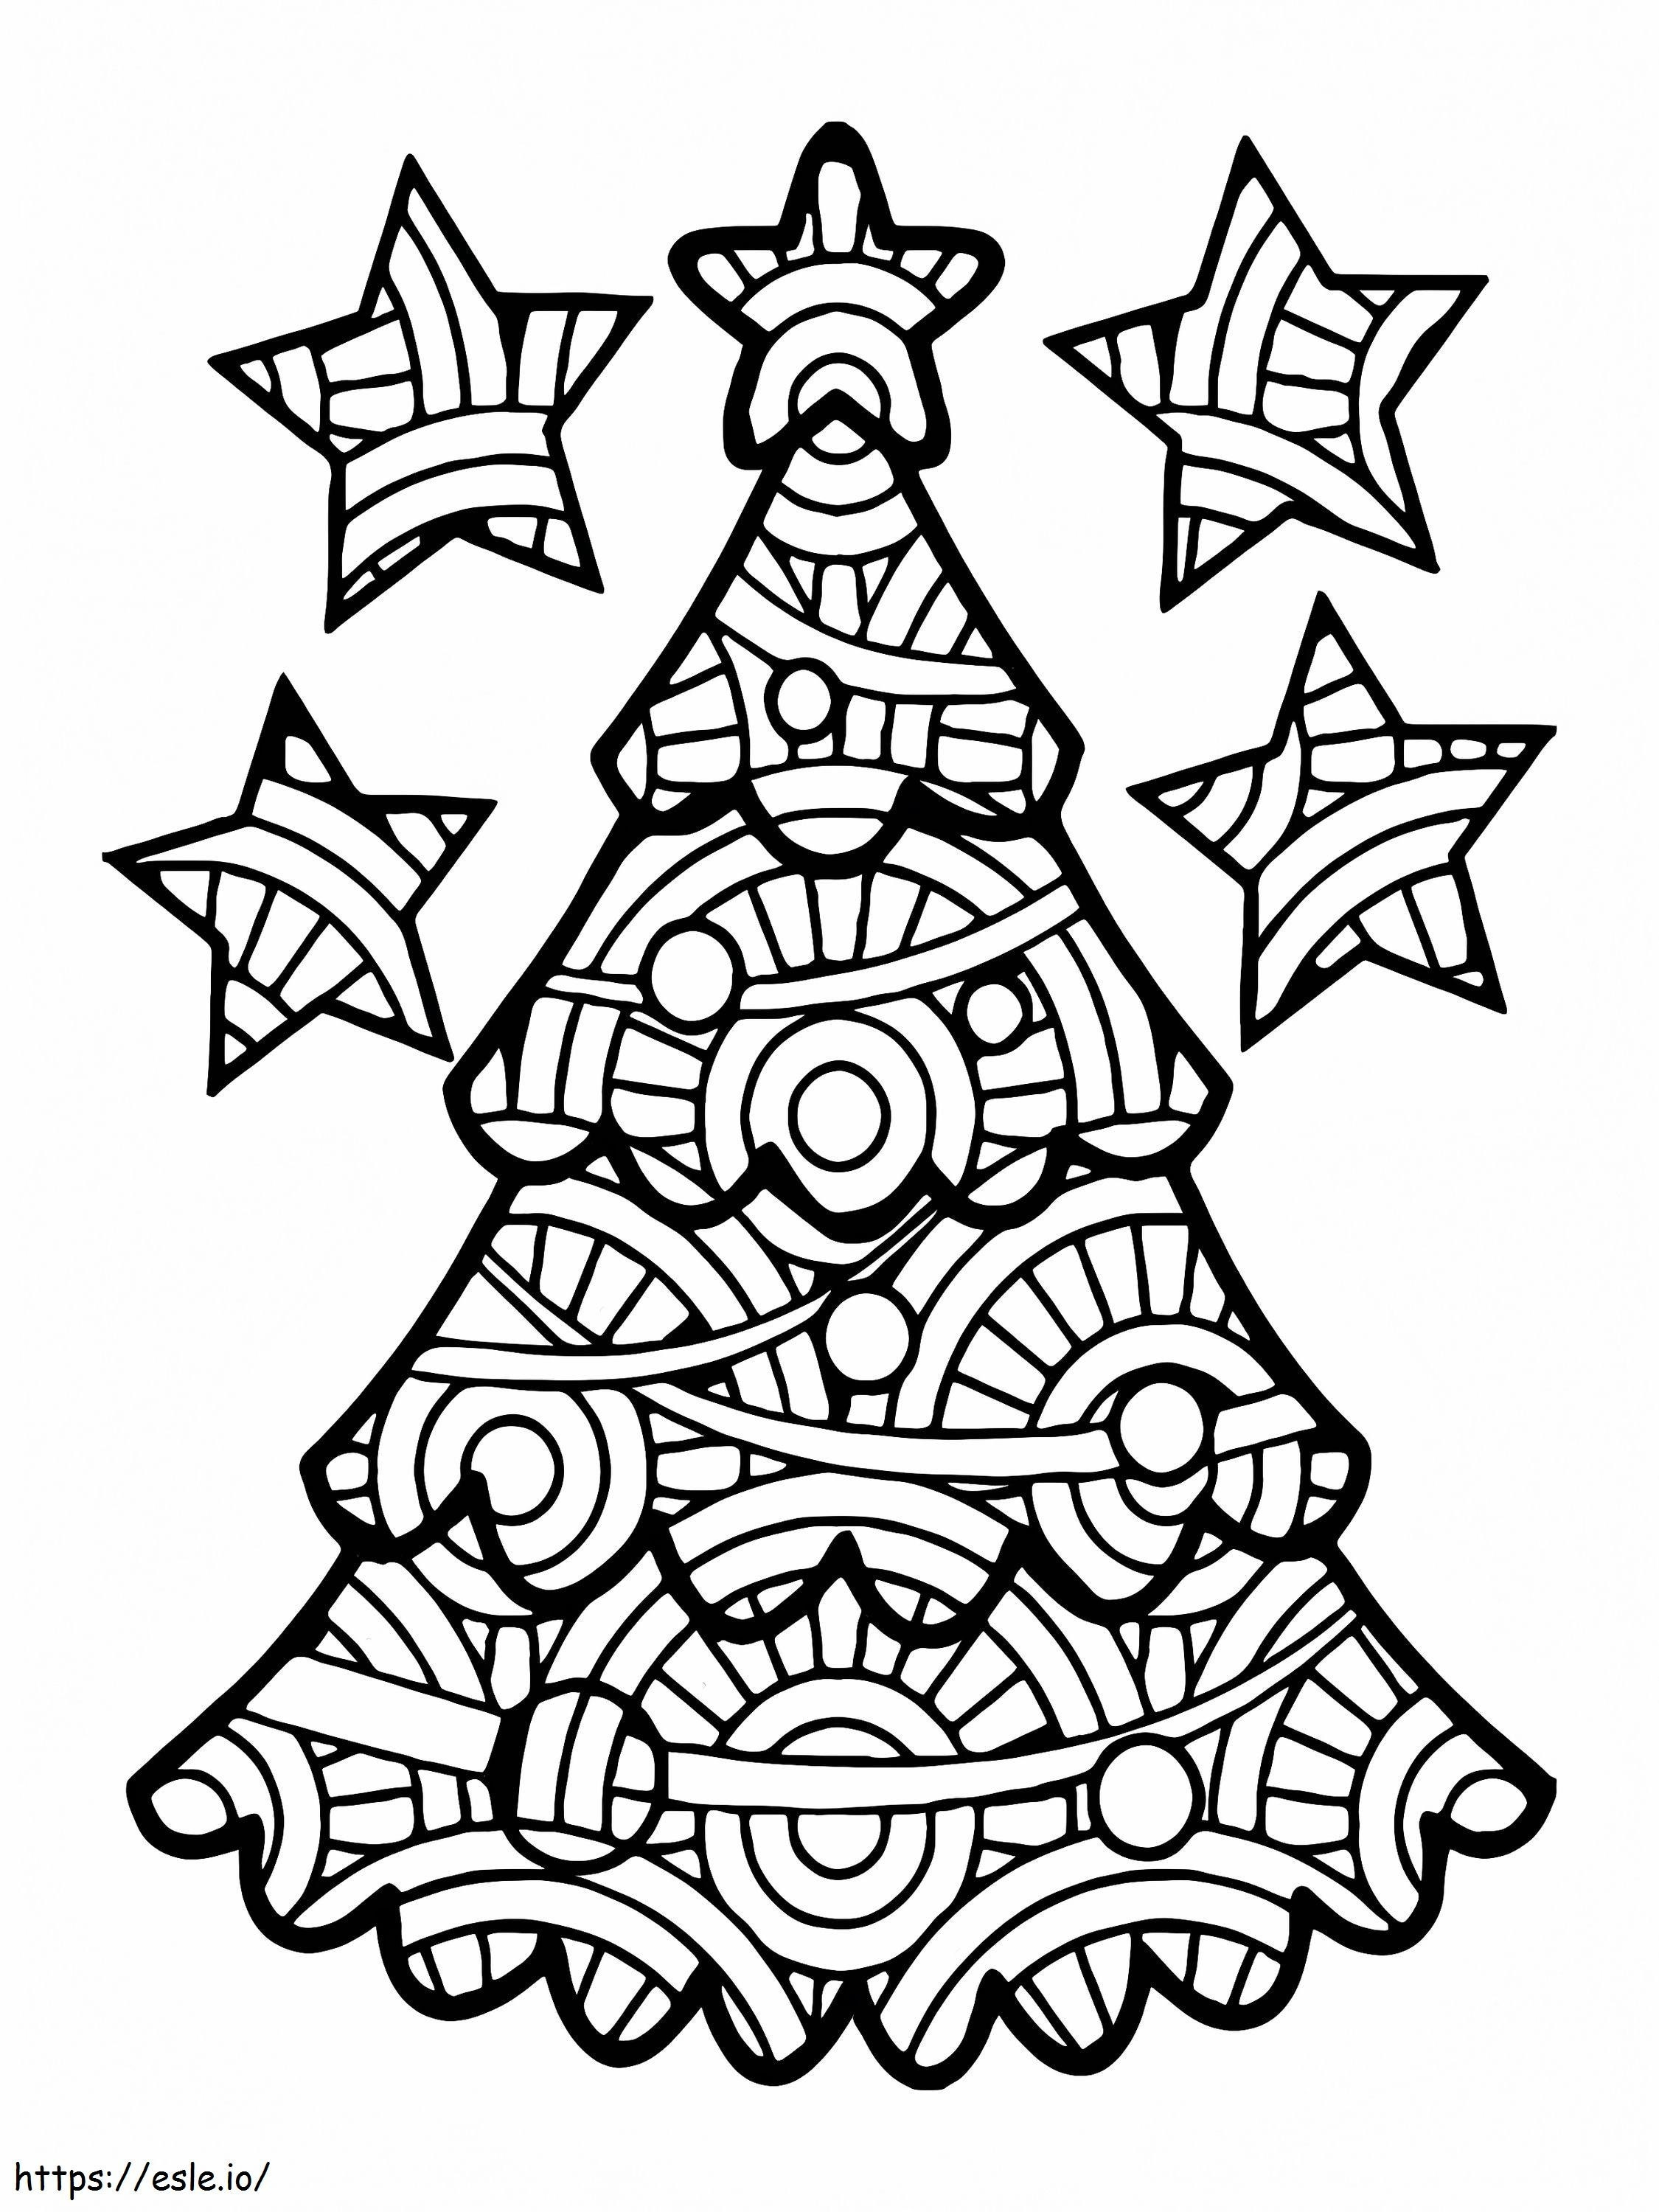 Decorative Christmas Tree coloring page